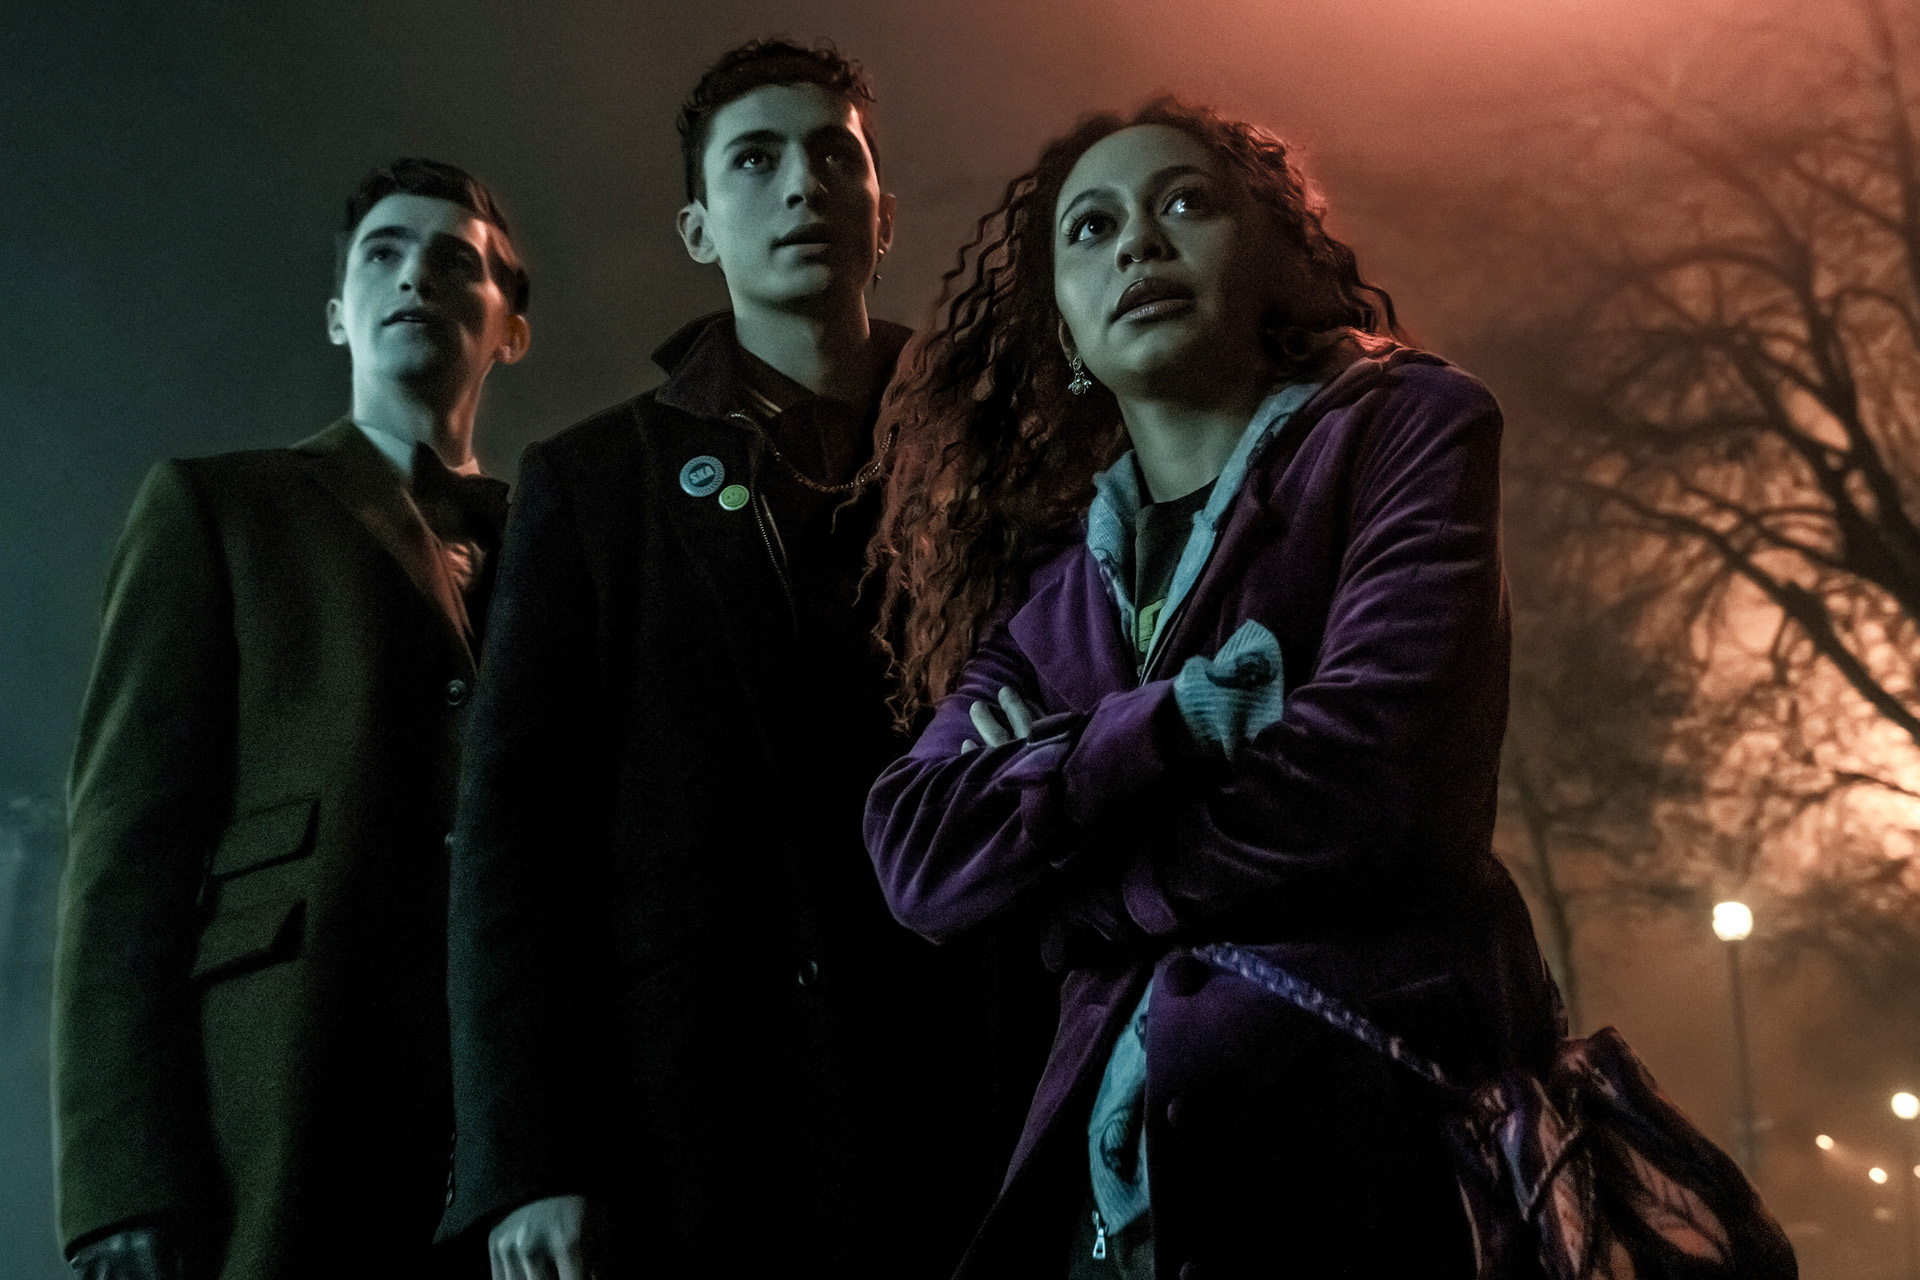 (L-R) George Rexstrew as Edwin Payne, Jayden Revri as Charles Rowland and Kassius Nelson as Crystal Palace in Episode 103 in DEAD BOY DETECTIVES